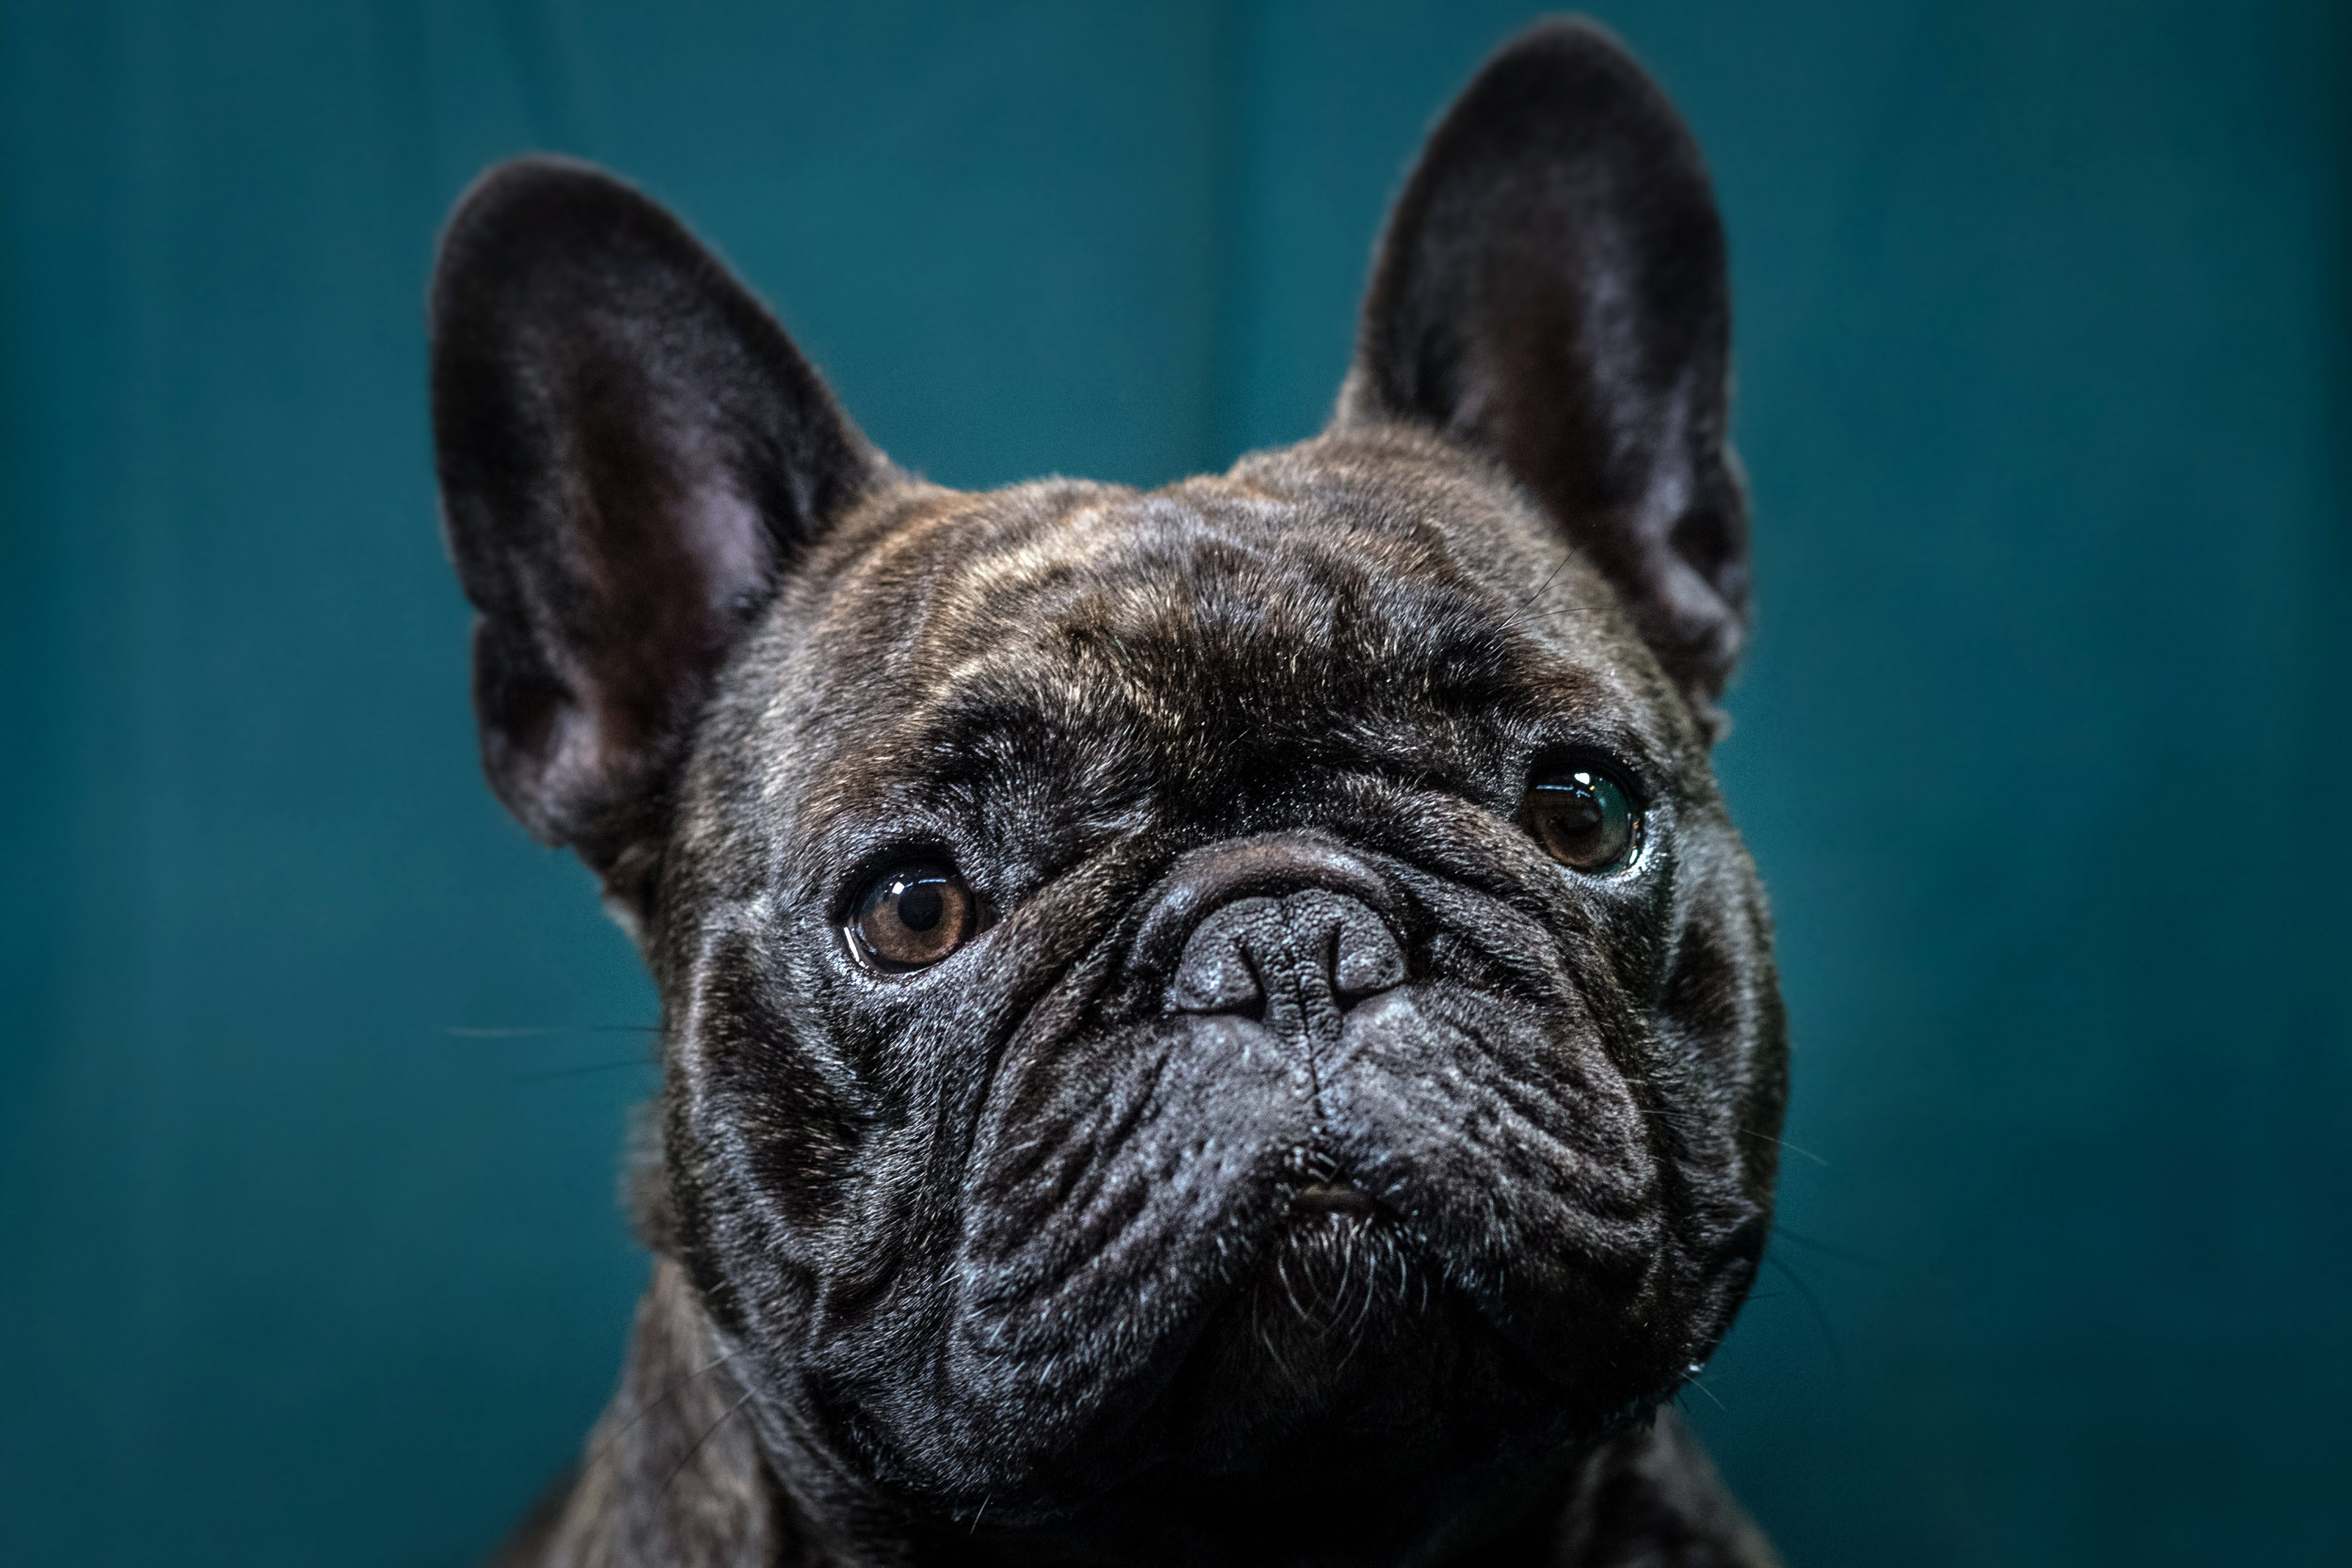 Short Walk in Hot Weather Leaves French Bulldog Dead From